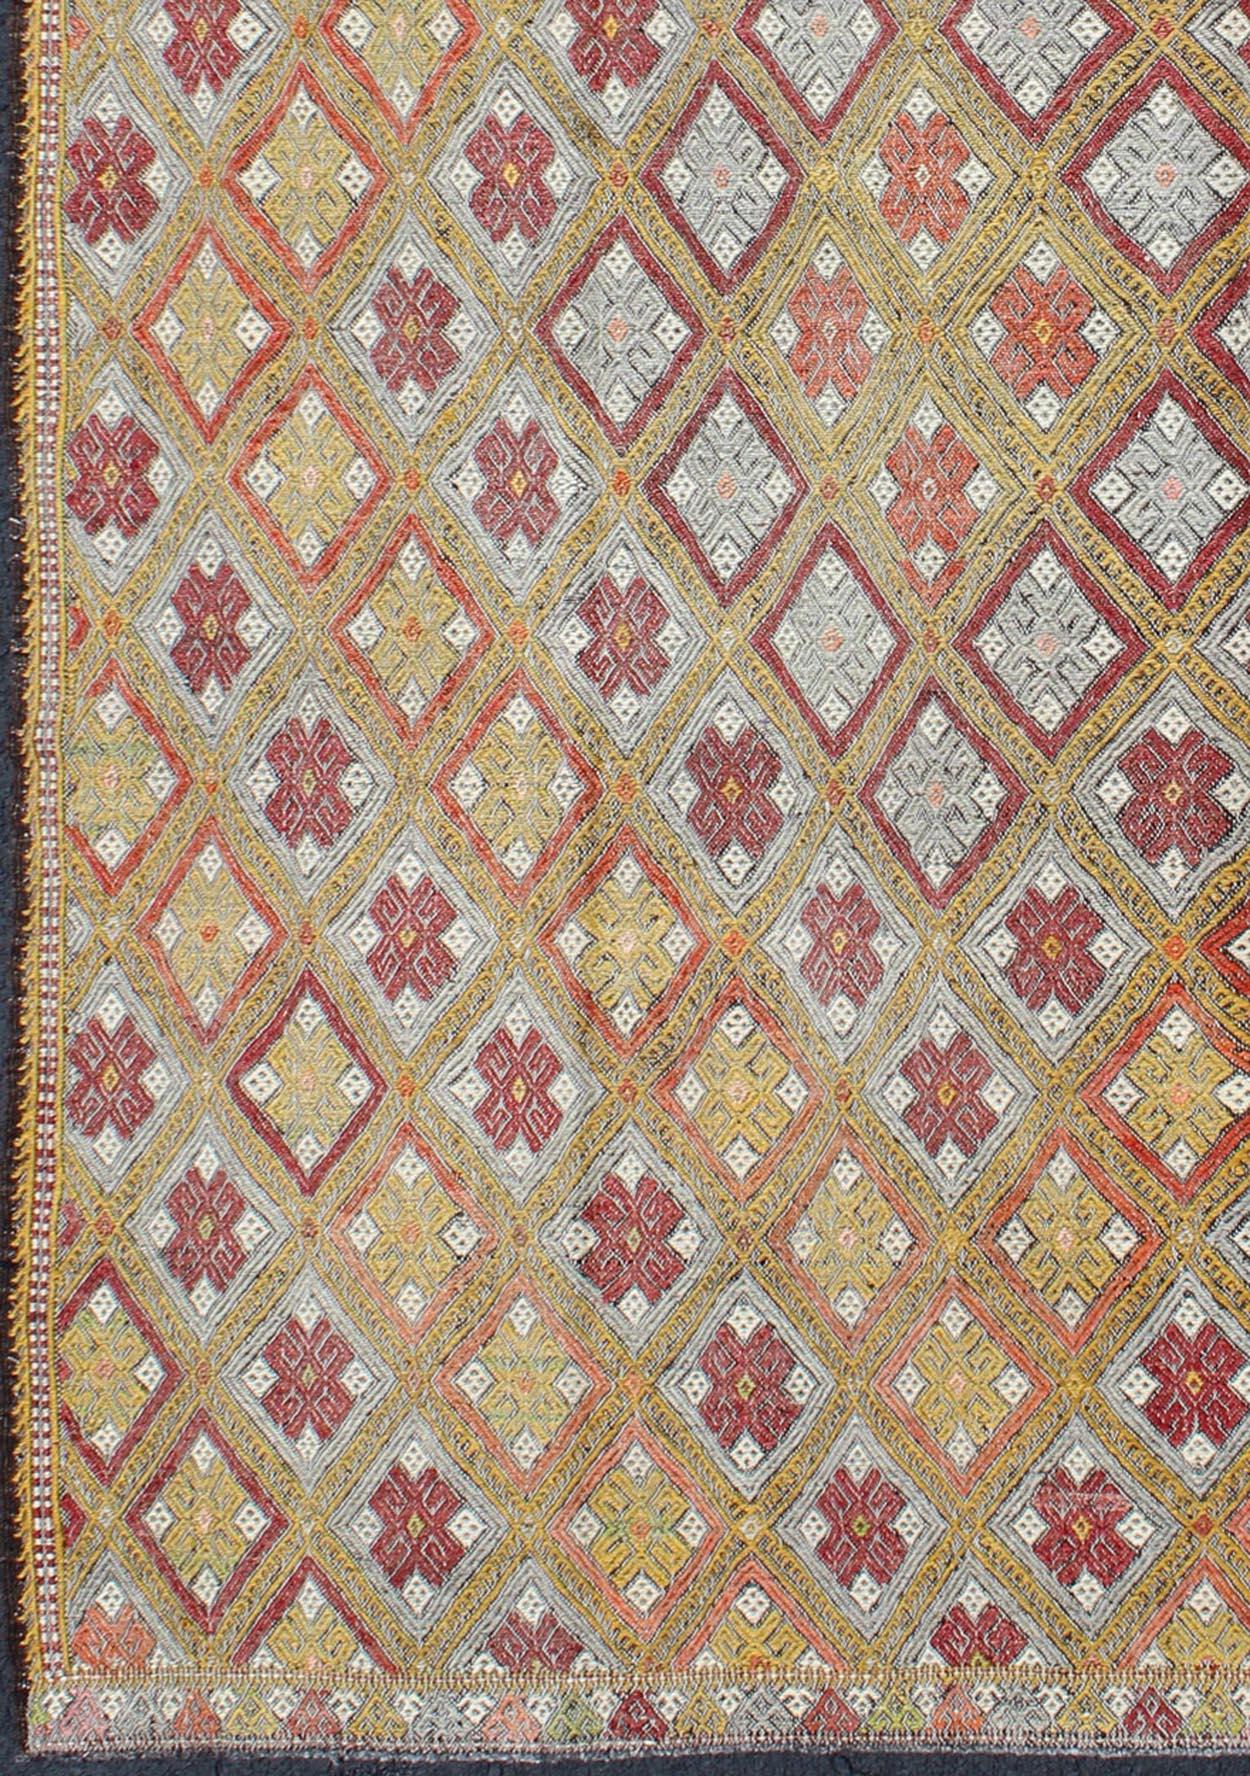 Woven during the mid-20th century in Turkey, this designer Embroidered Kilim is decorated with geometric motifs rendered in a diamond pattern. This flat-woven Kilim contains various multi-colors, and makes the perfect accent piece to any